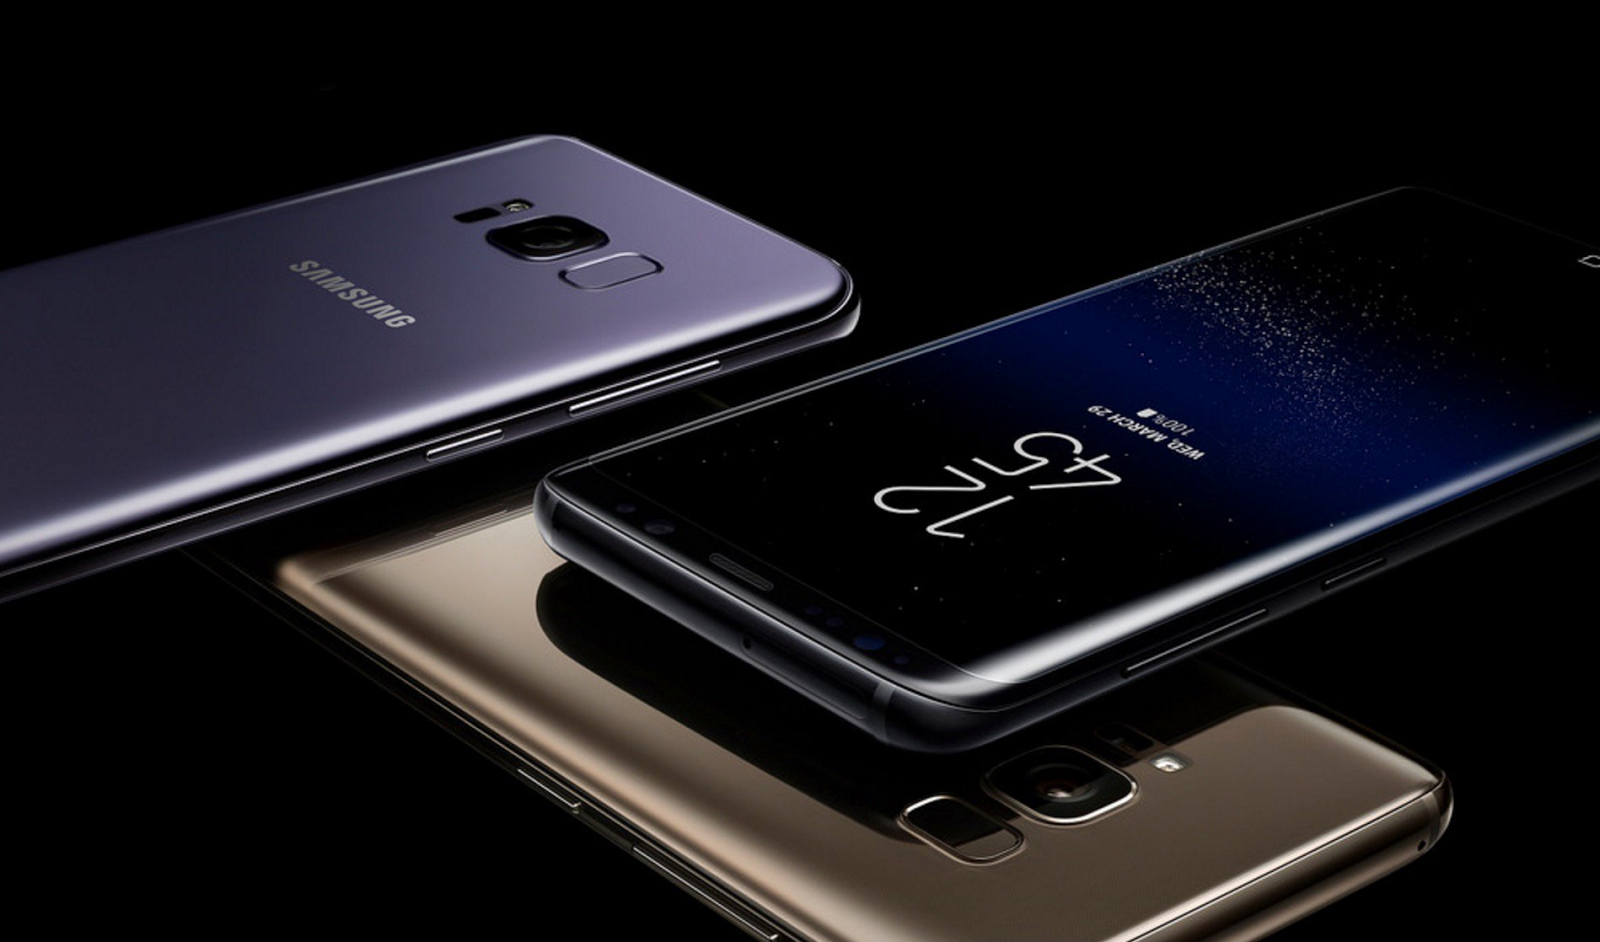 Samsung Galaxy S8 & S8 Plus Specification, Price, Overview